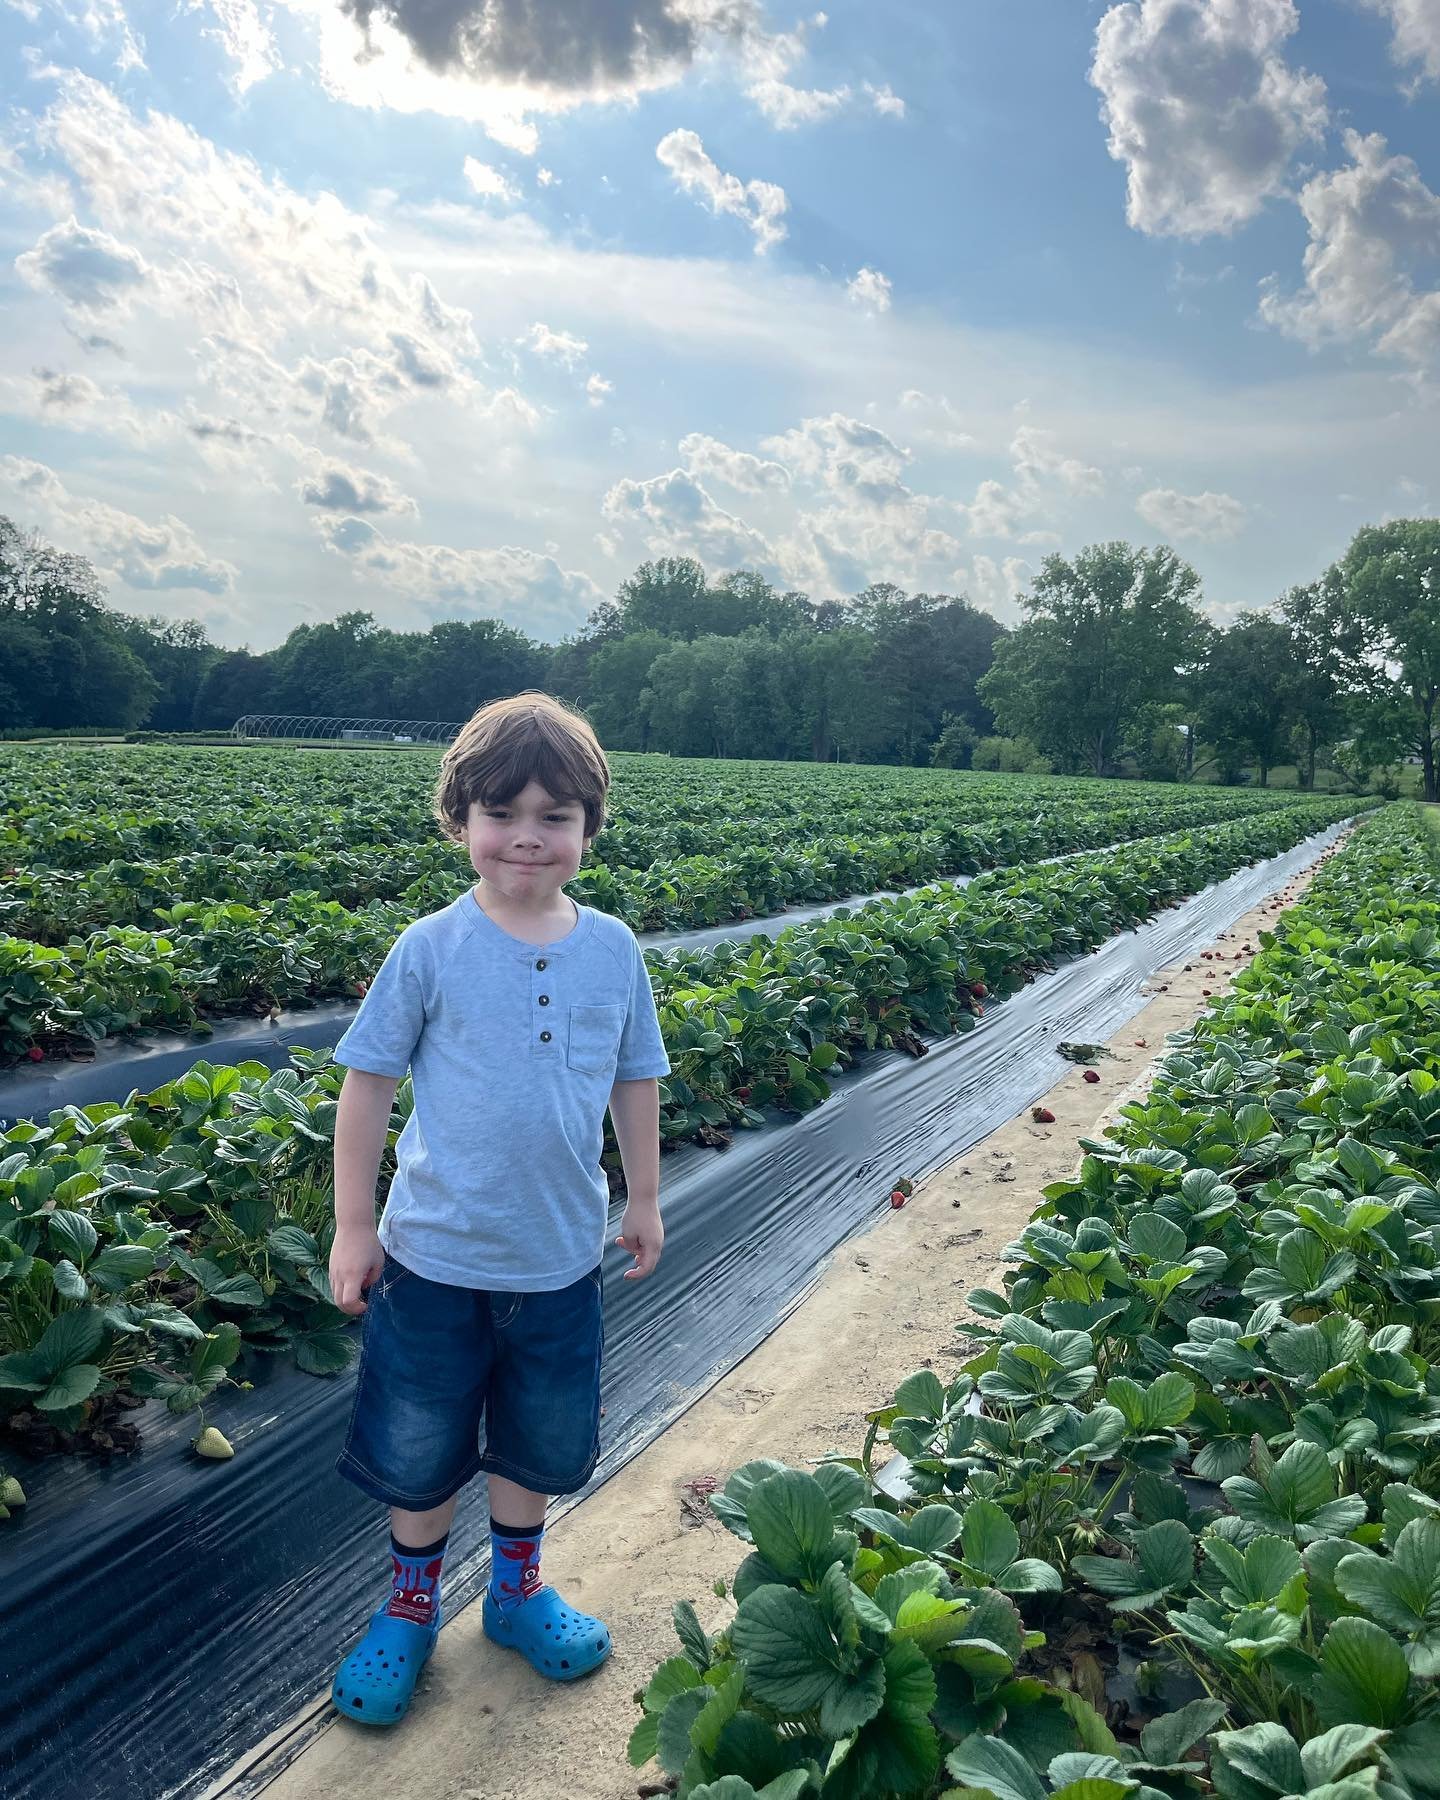 We hope everyone is having a wonderful Sunday! We have an announcement 📣 🍓

We just wanted to let you know that we only have u-pick strawberries available right now. 

We have NO pre-picked strawberries at the moment. 

We will have pre-picked agai